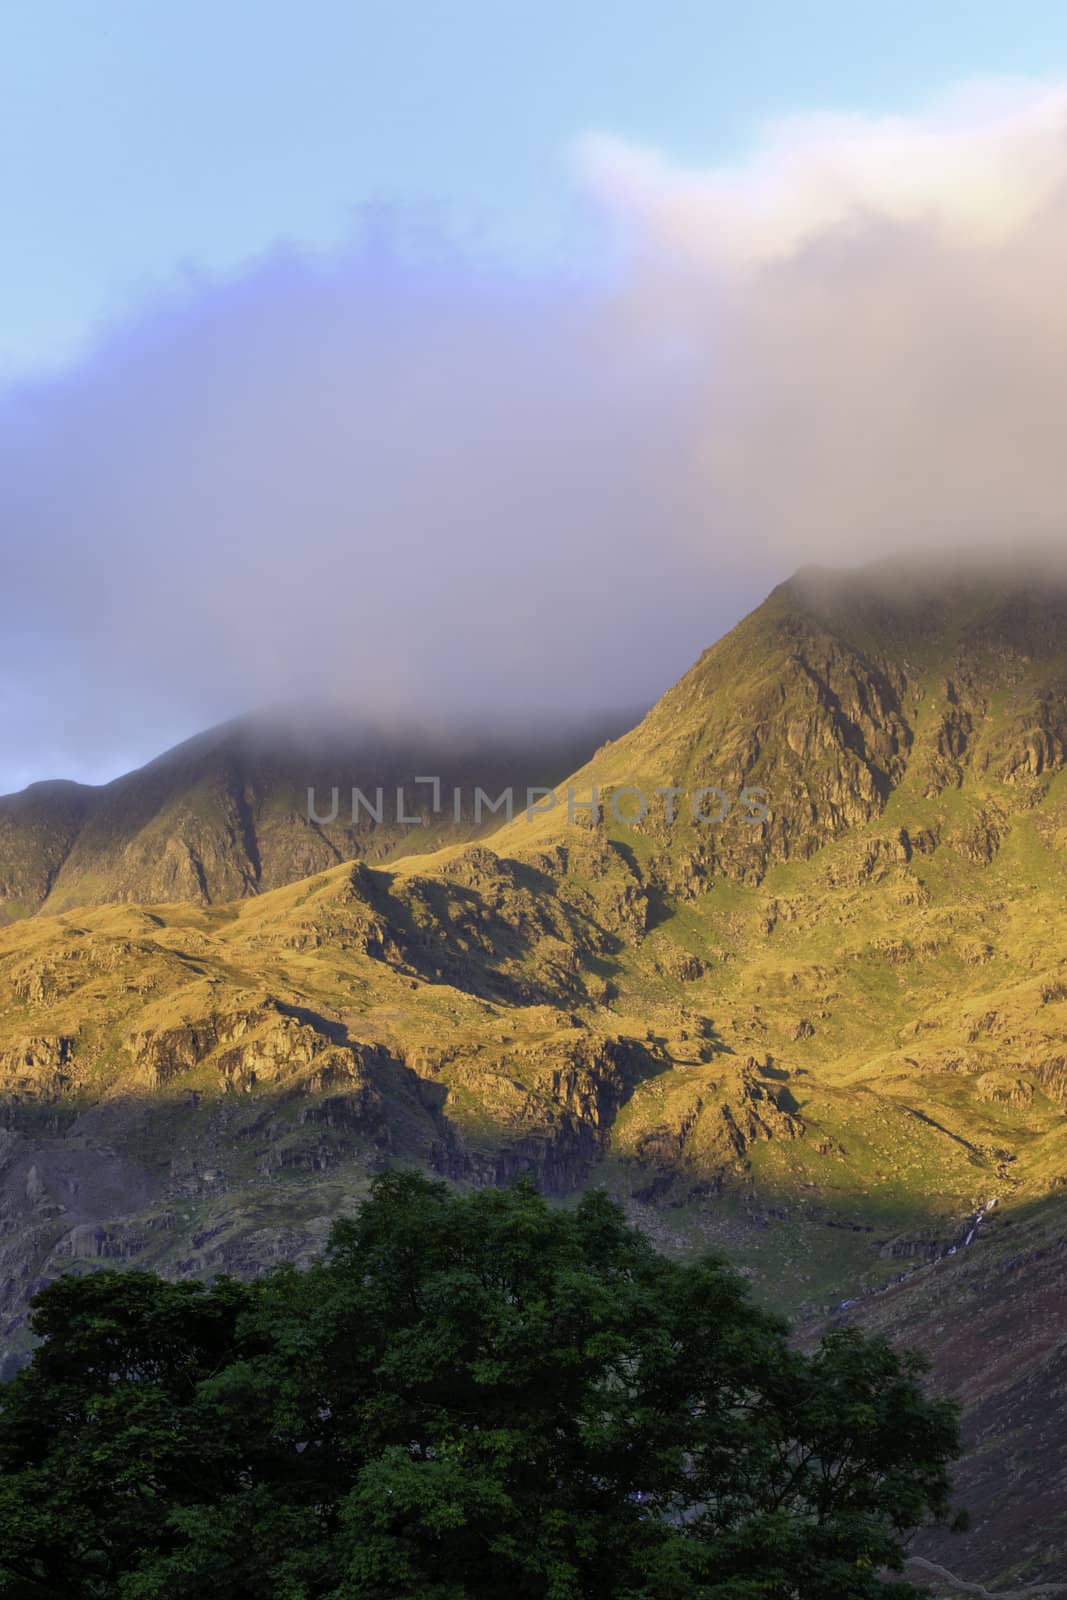 Shaft of sunlight catching a rugged mountain range with its top enveloped in cloud and a green leafy tree in the foreground